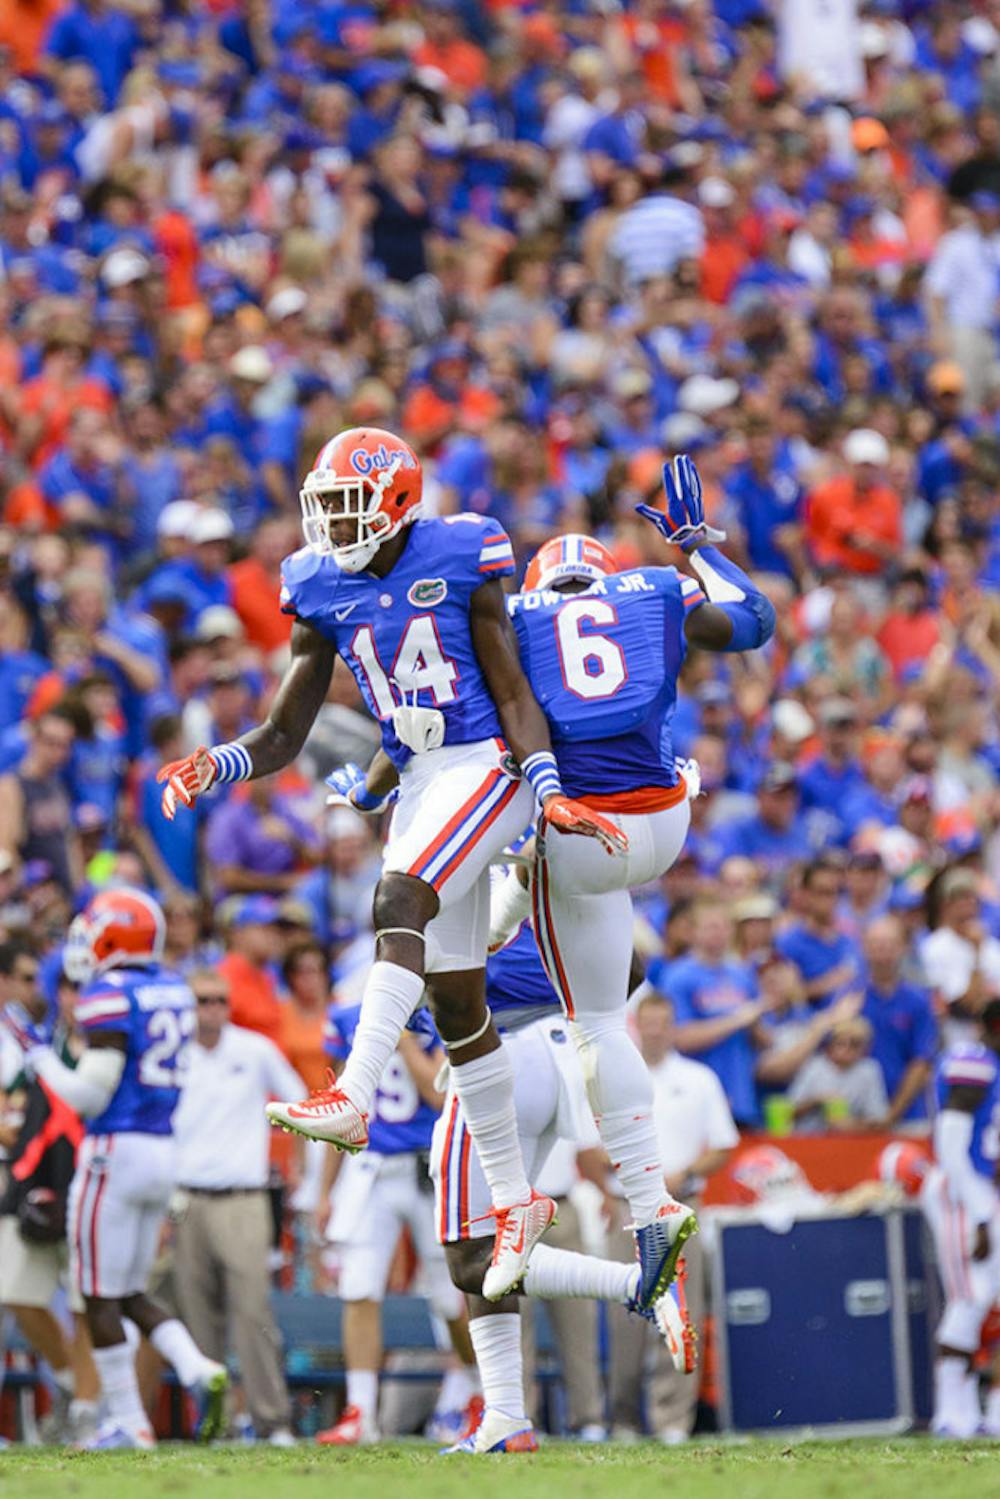 <p><span>Alex McCalister and Dante Fowler Jr. celebrate an Eagles turnover during the Florida's 65-0 win against Eastern Michigan on Saturday at Ben Hill Griffin Stadium.</span></p>